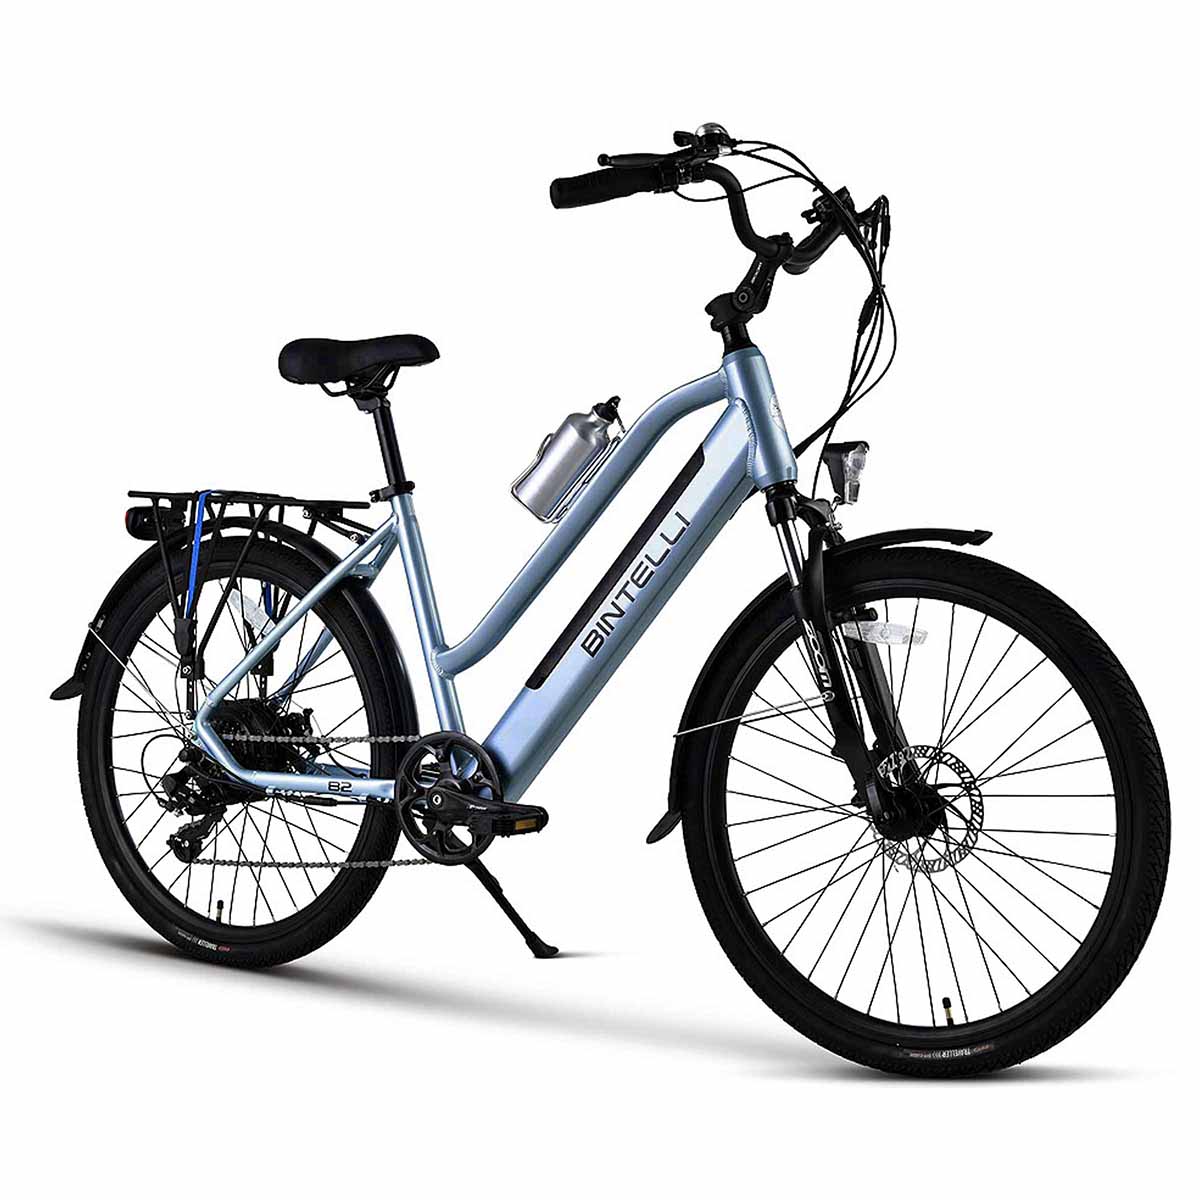 Model B2 Anvil beach cruiser e bike comes with 20 mph speed and 350w motor